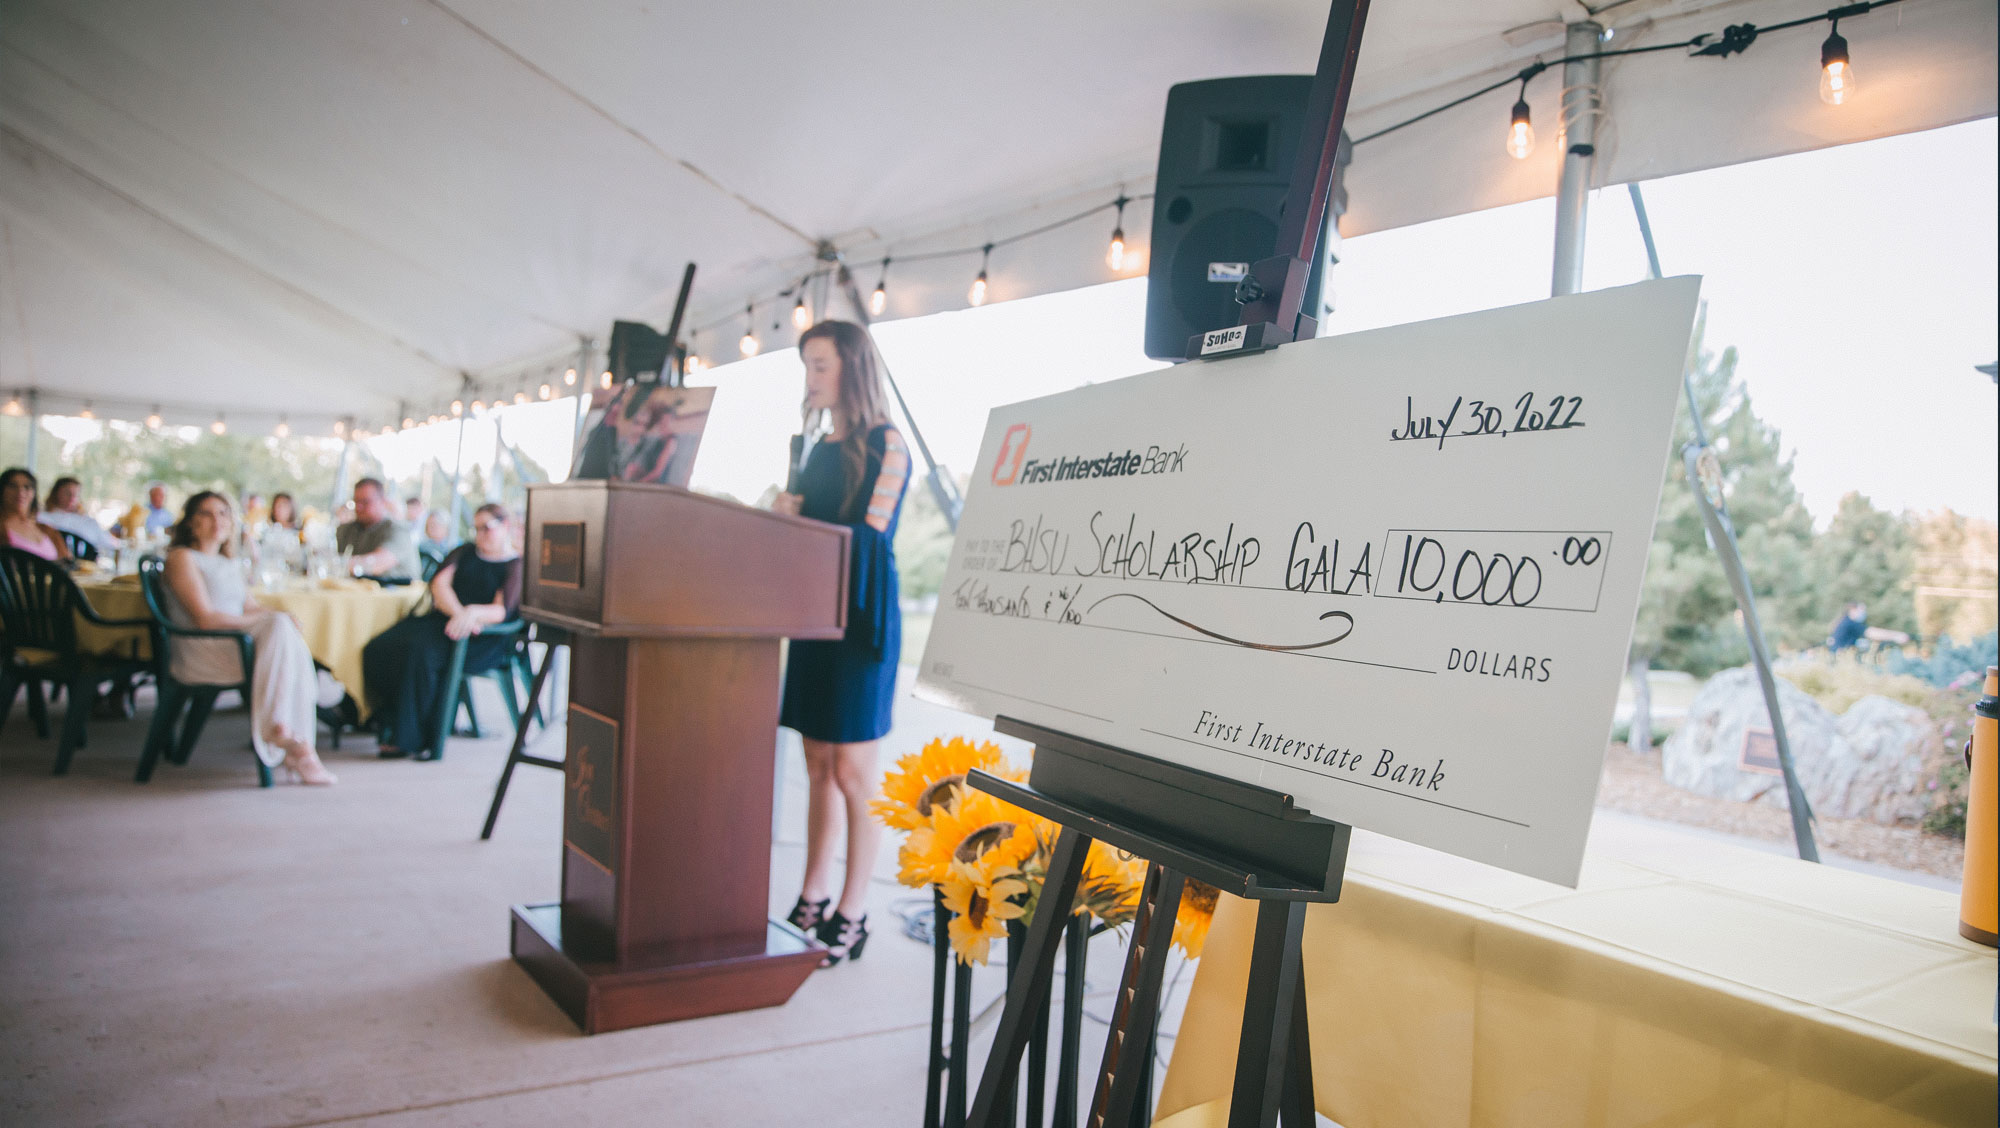 A large check on display at the 2022 Scholarship Gala